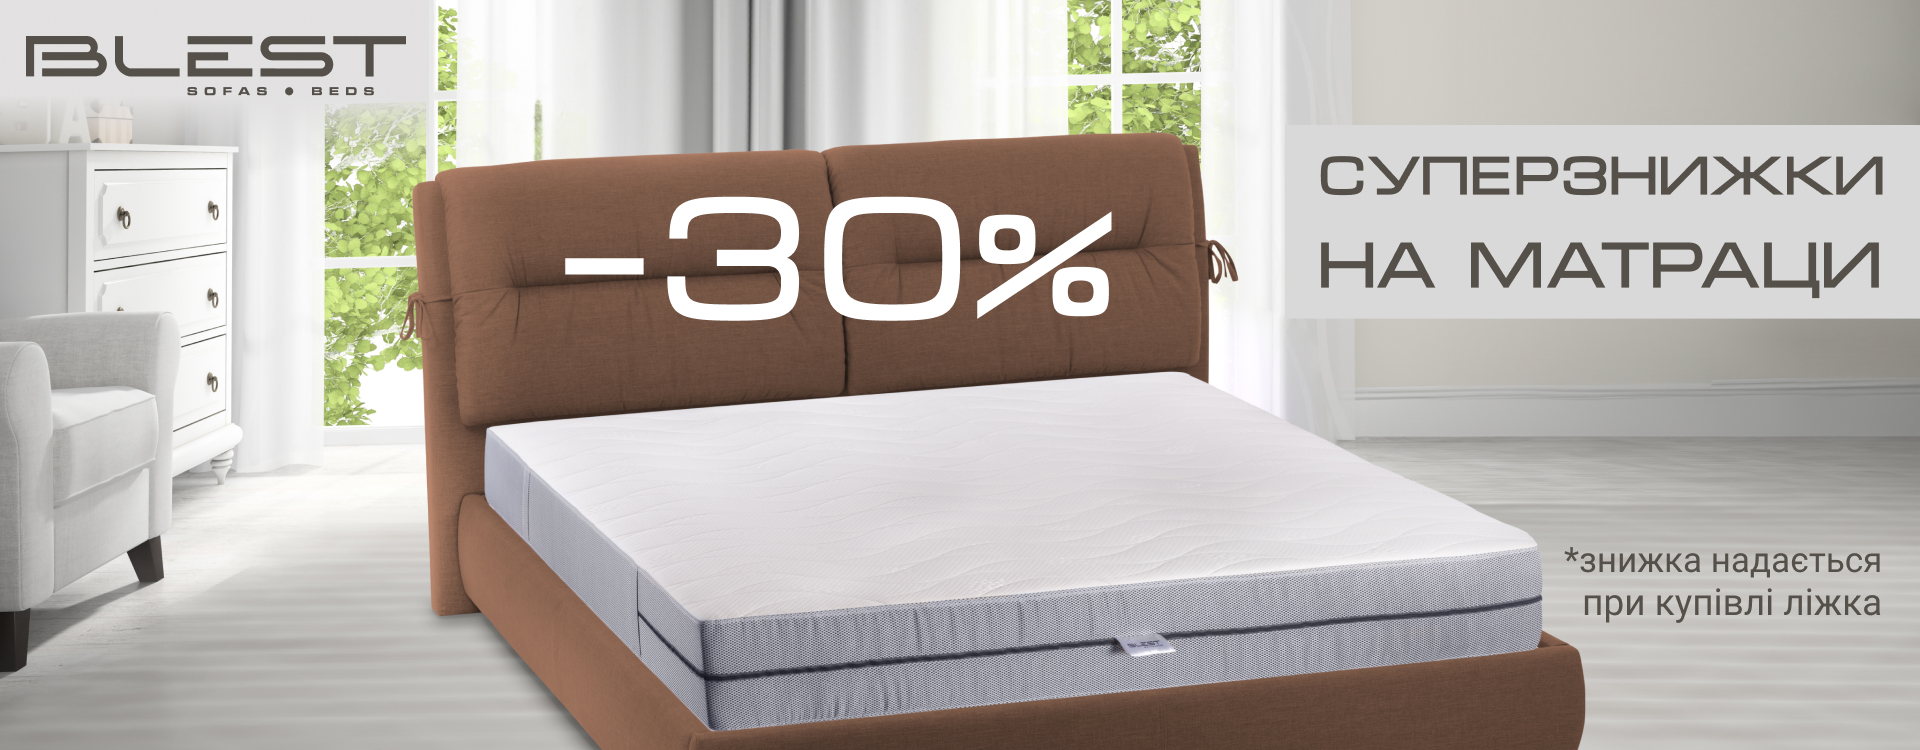 Super discounts on mattresses -30% in BLEST